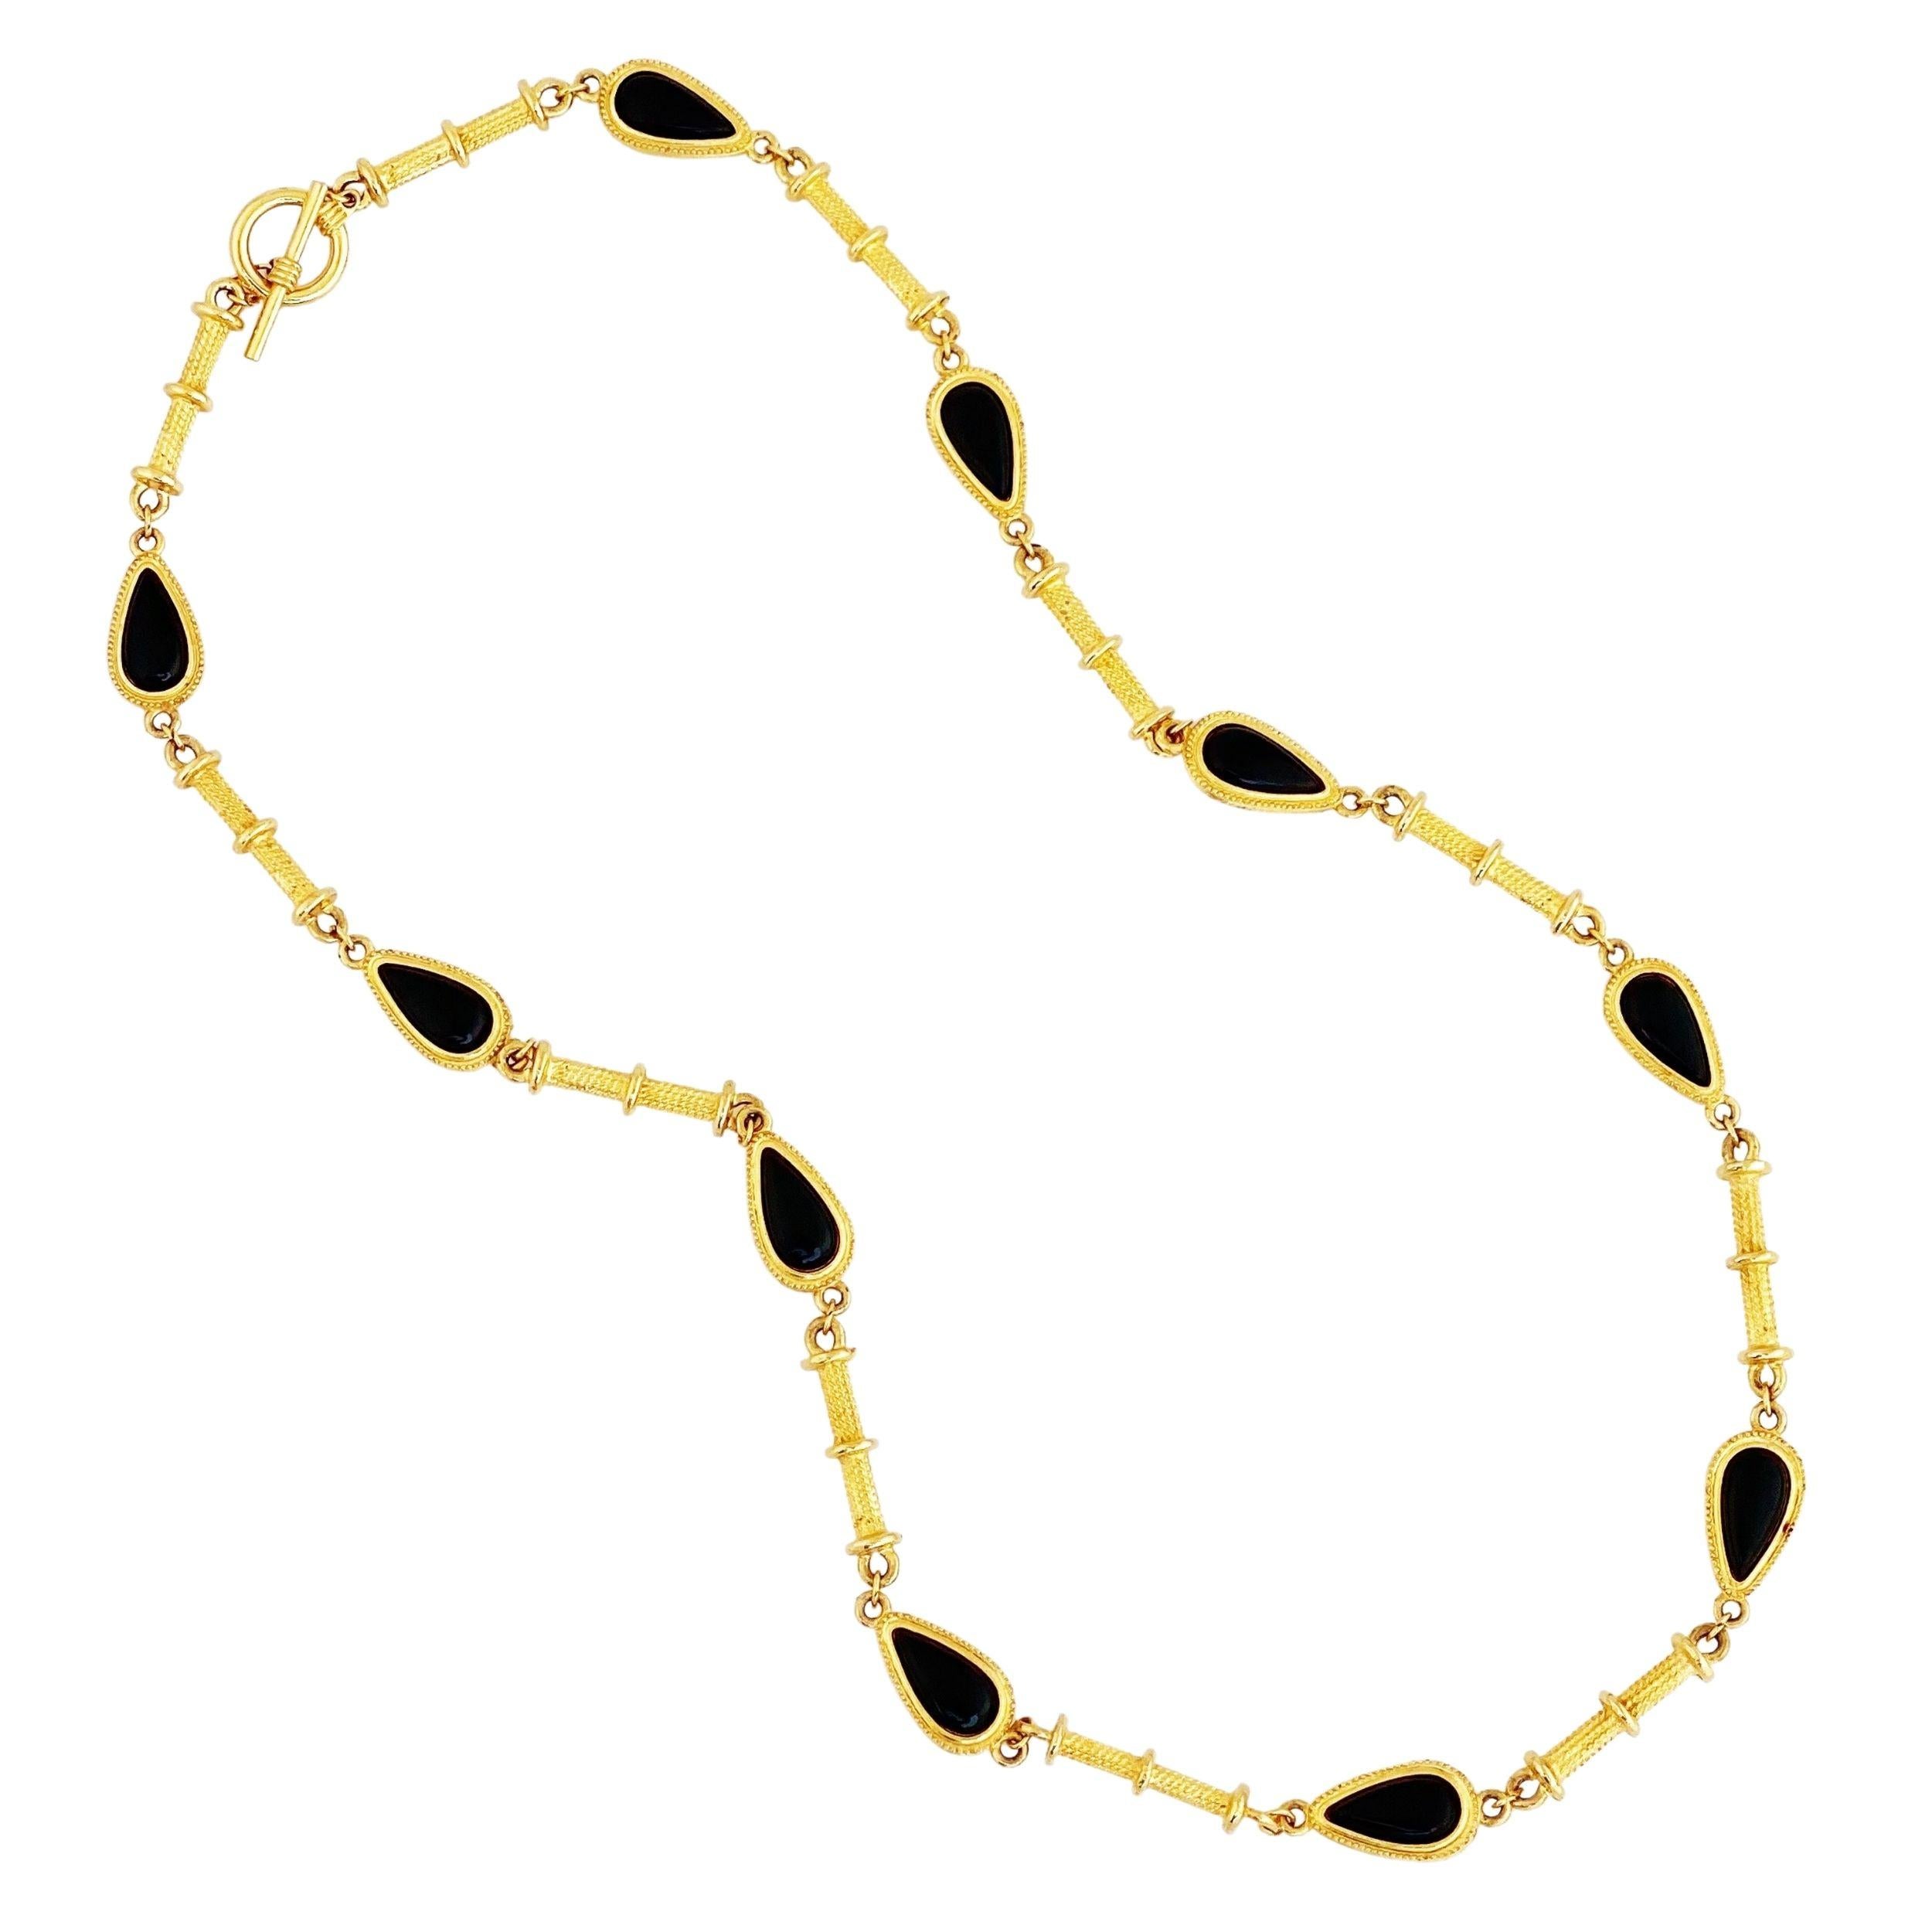 Gold Link Chain Necklace with Black Resin Teardrop Details, 1980s